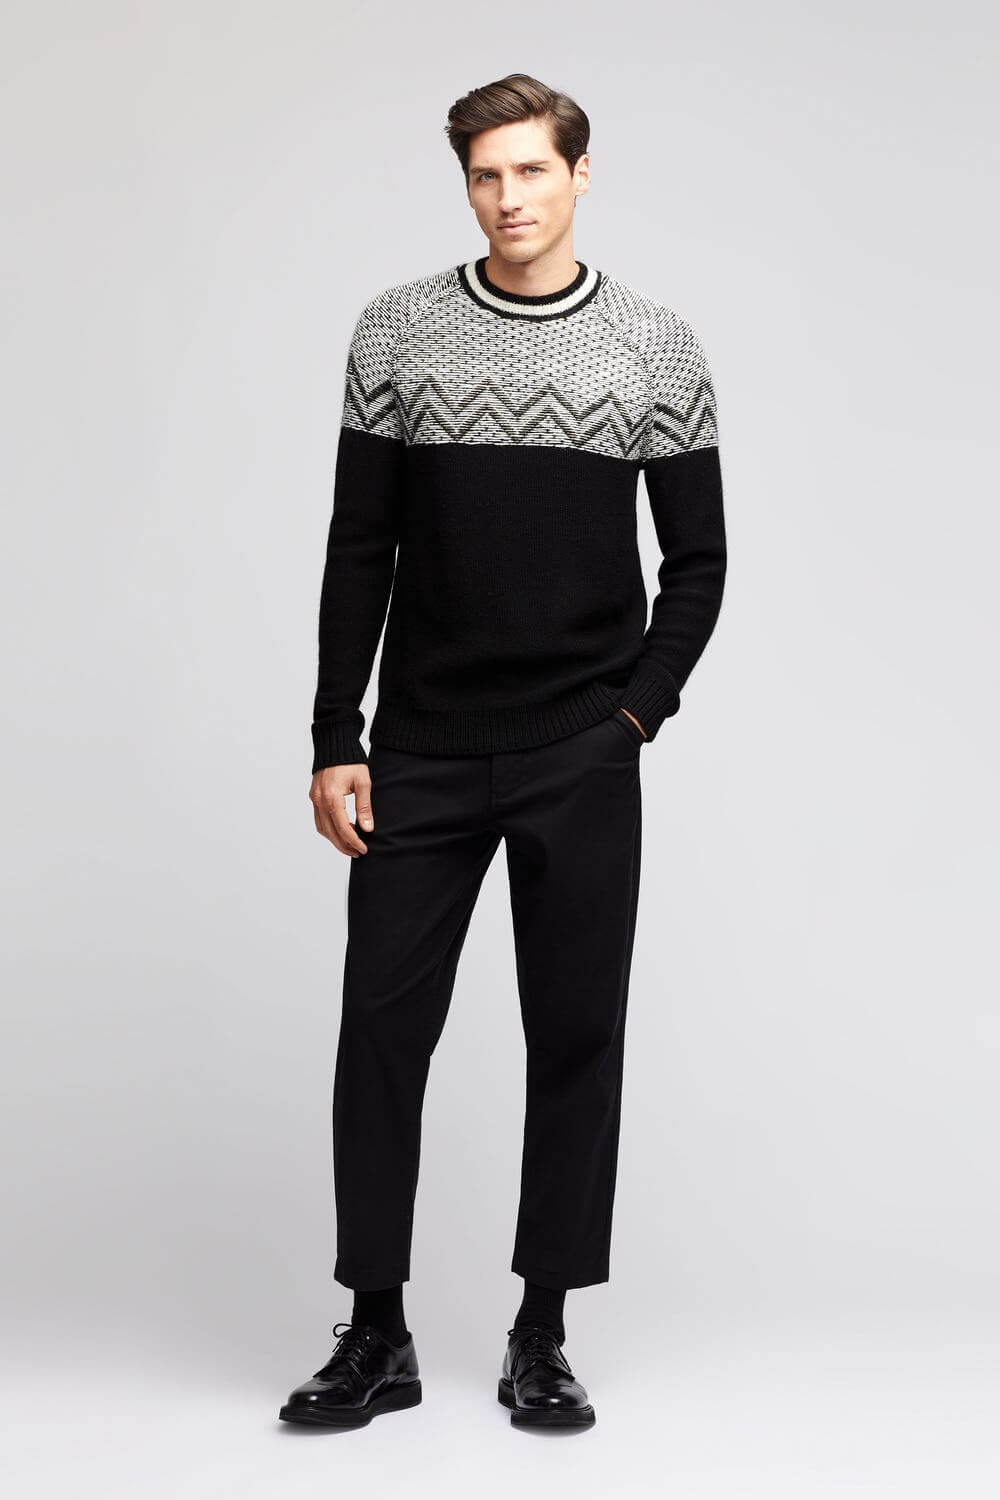 The Best Clothes To Gift Guys This Holiday – OnPointFresh